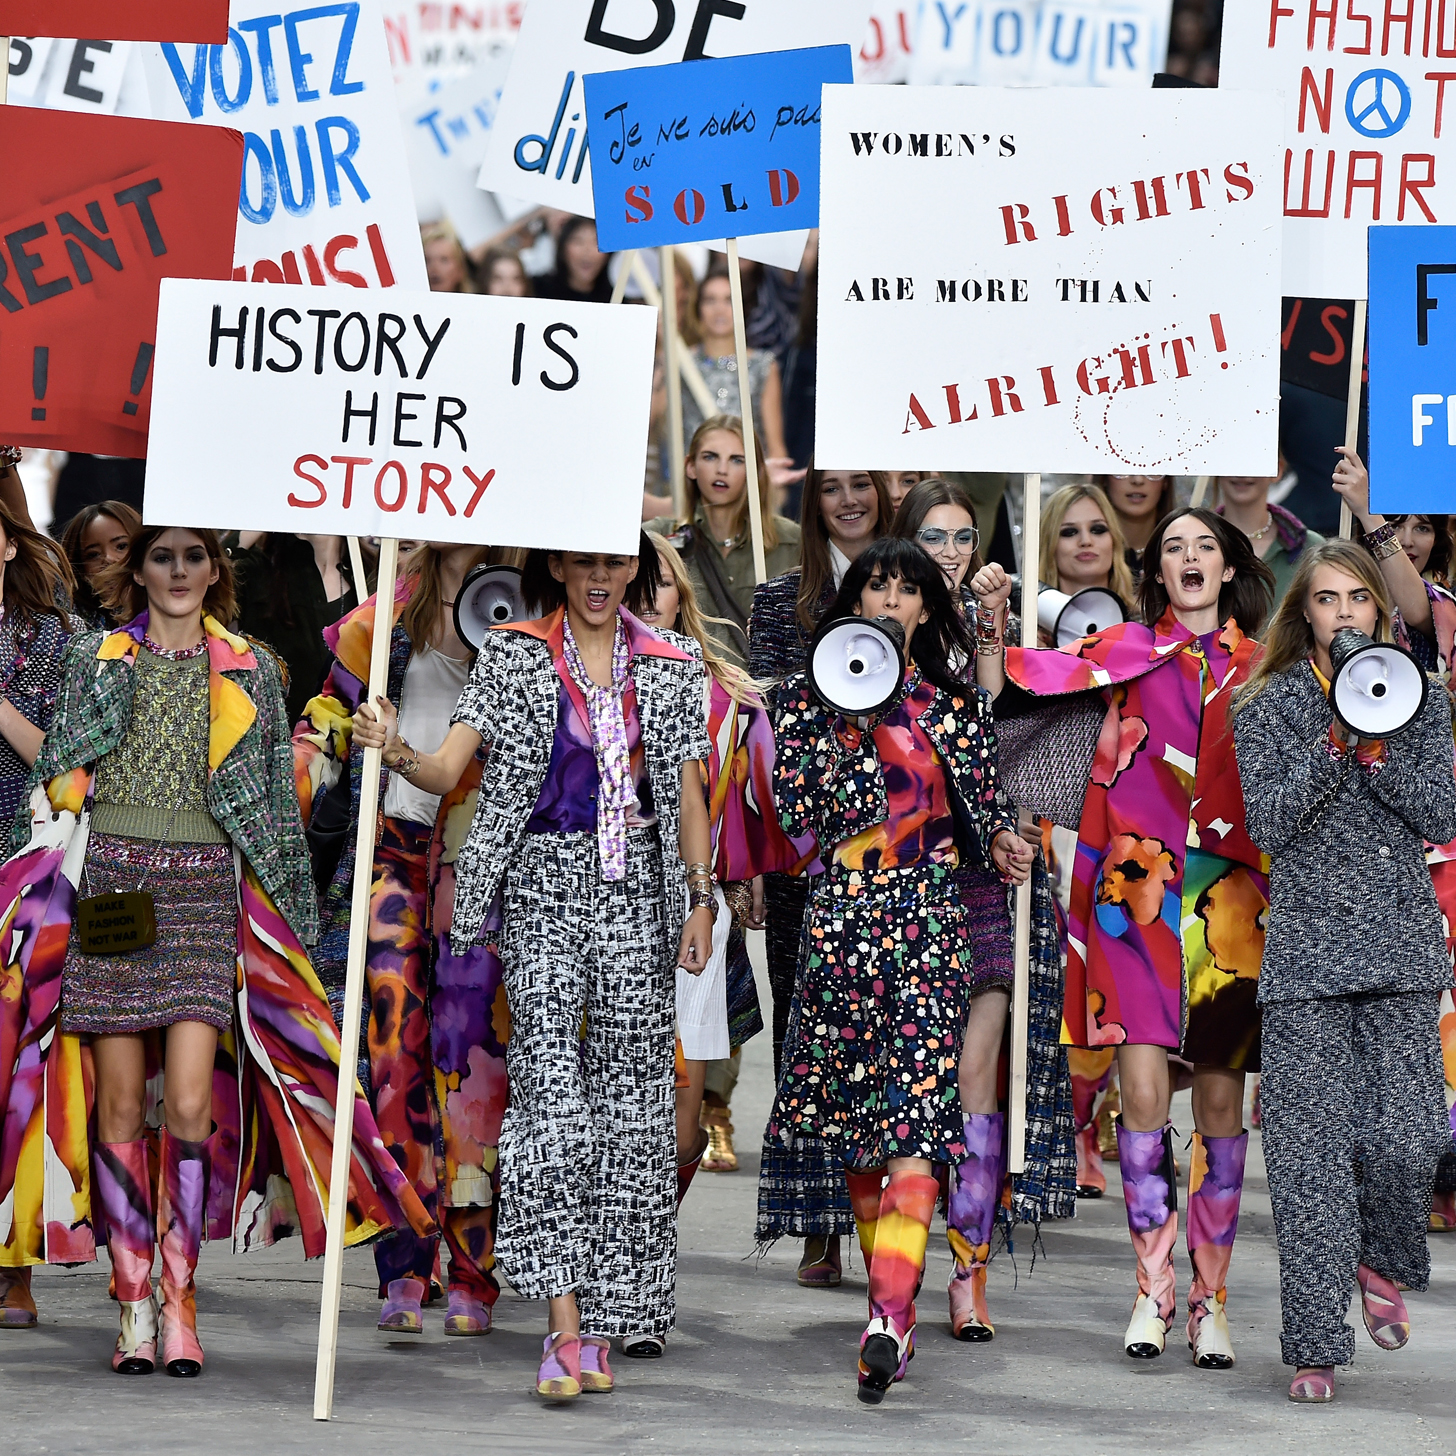 Feminism was so cool in 2014 even fashion label Chanel jumped on the bandwagon. Image Credit: Flickr.